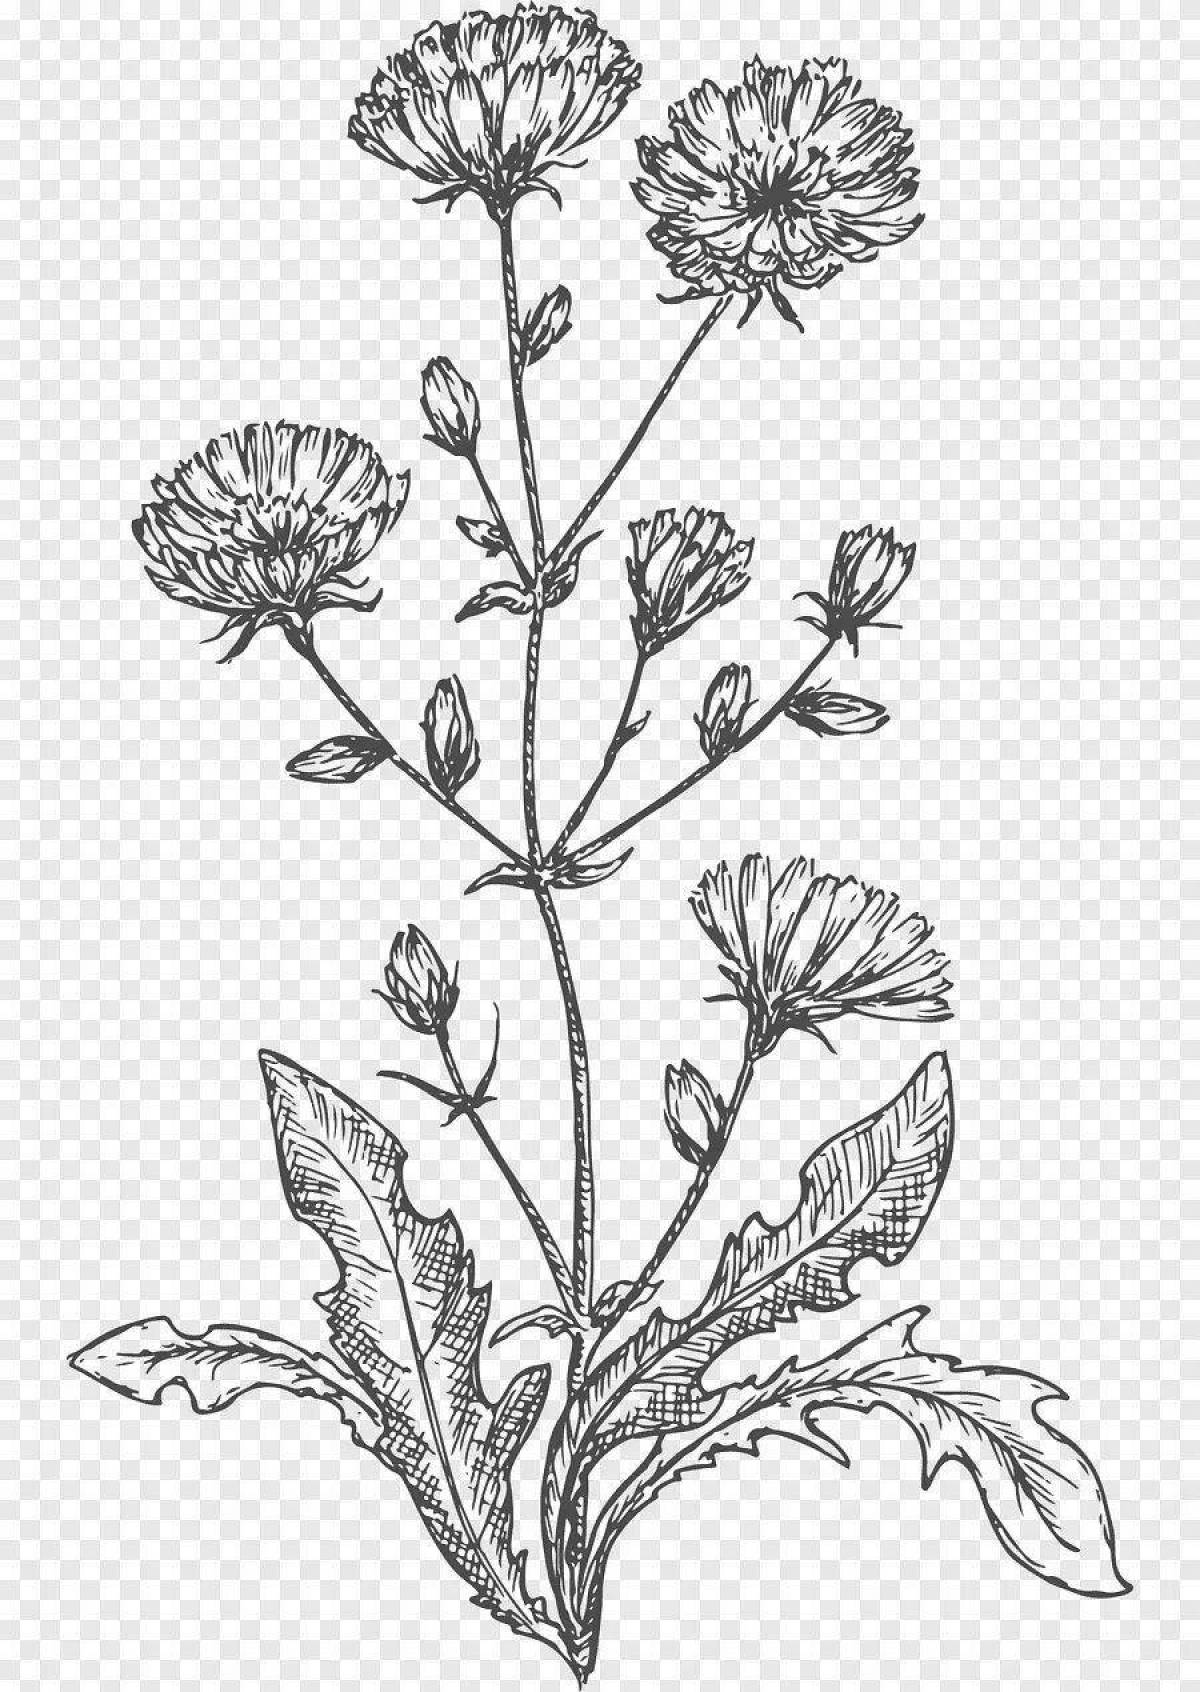 Chicory coloring page